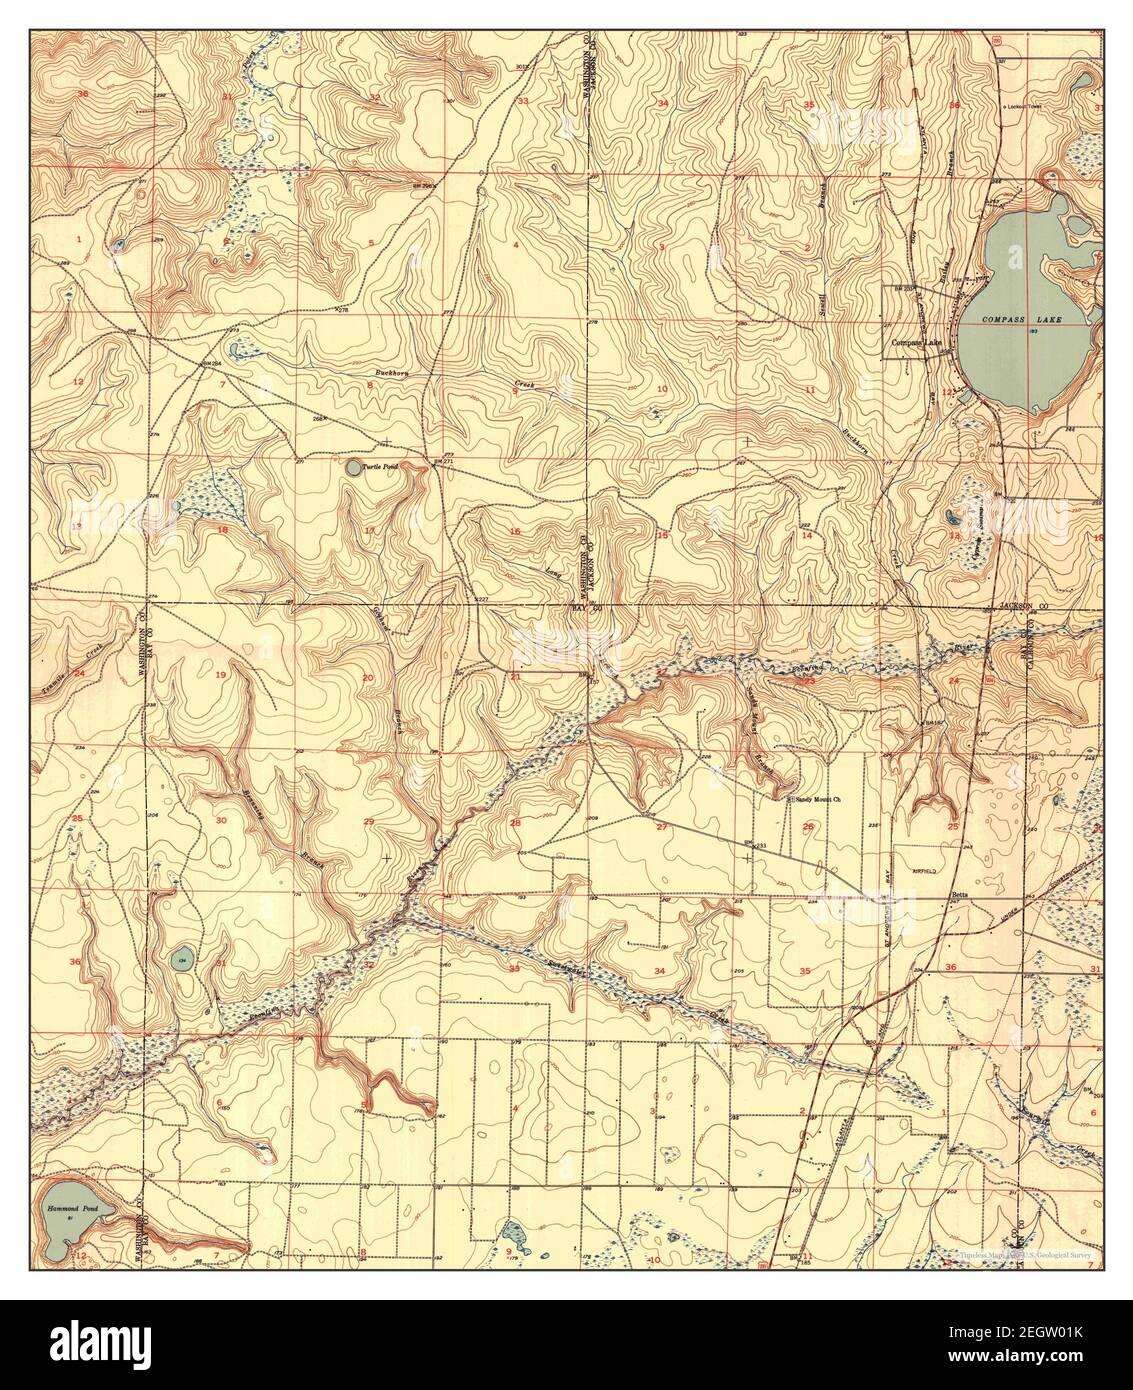 Compass Lake, Florida, map 1952, 1:24000, United States of America by Timeless Maps, data U.S. Geological Survey Stock Photo